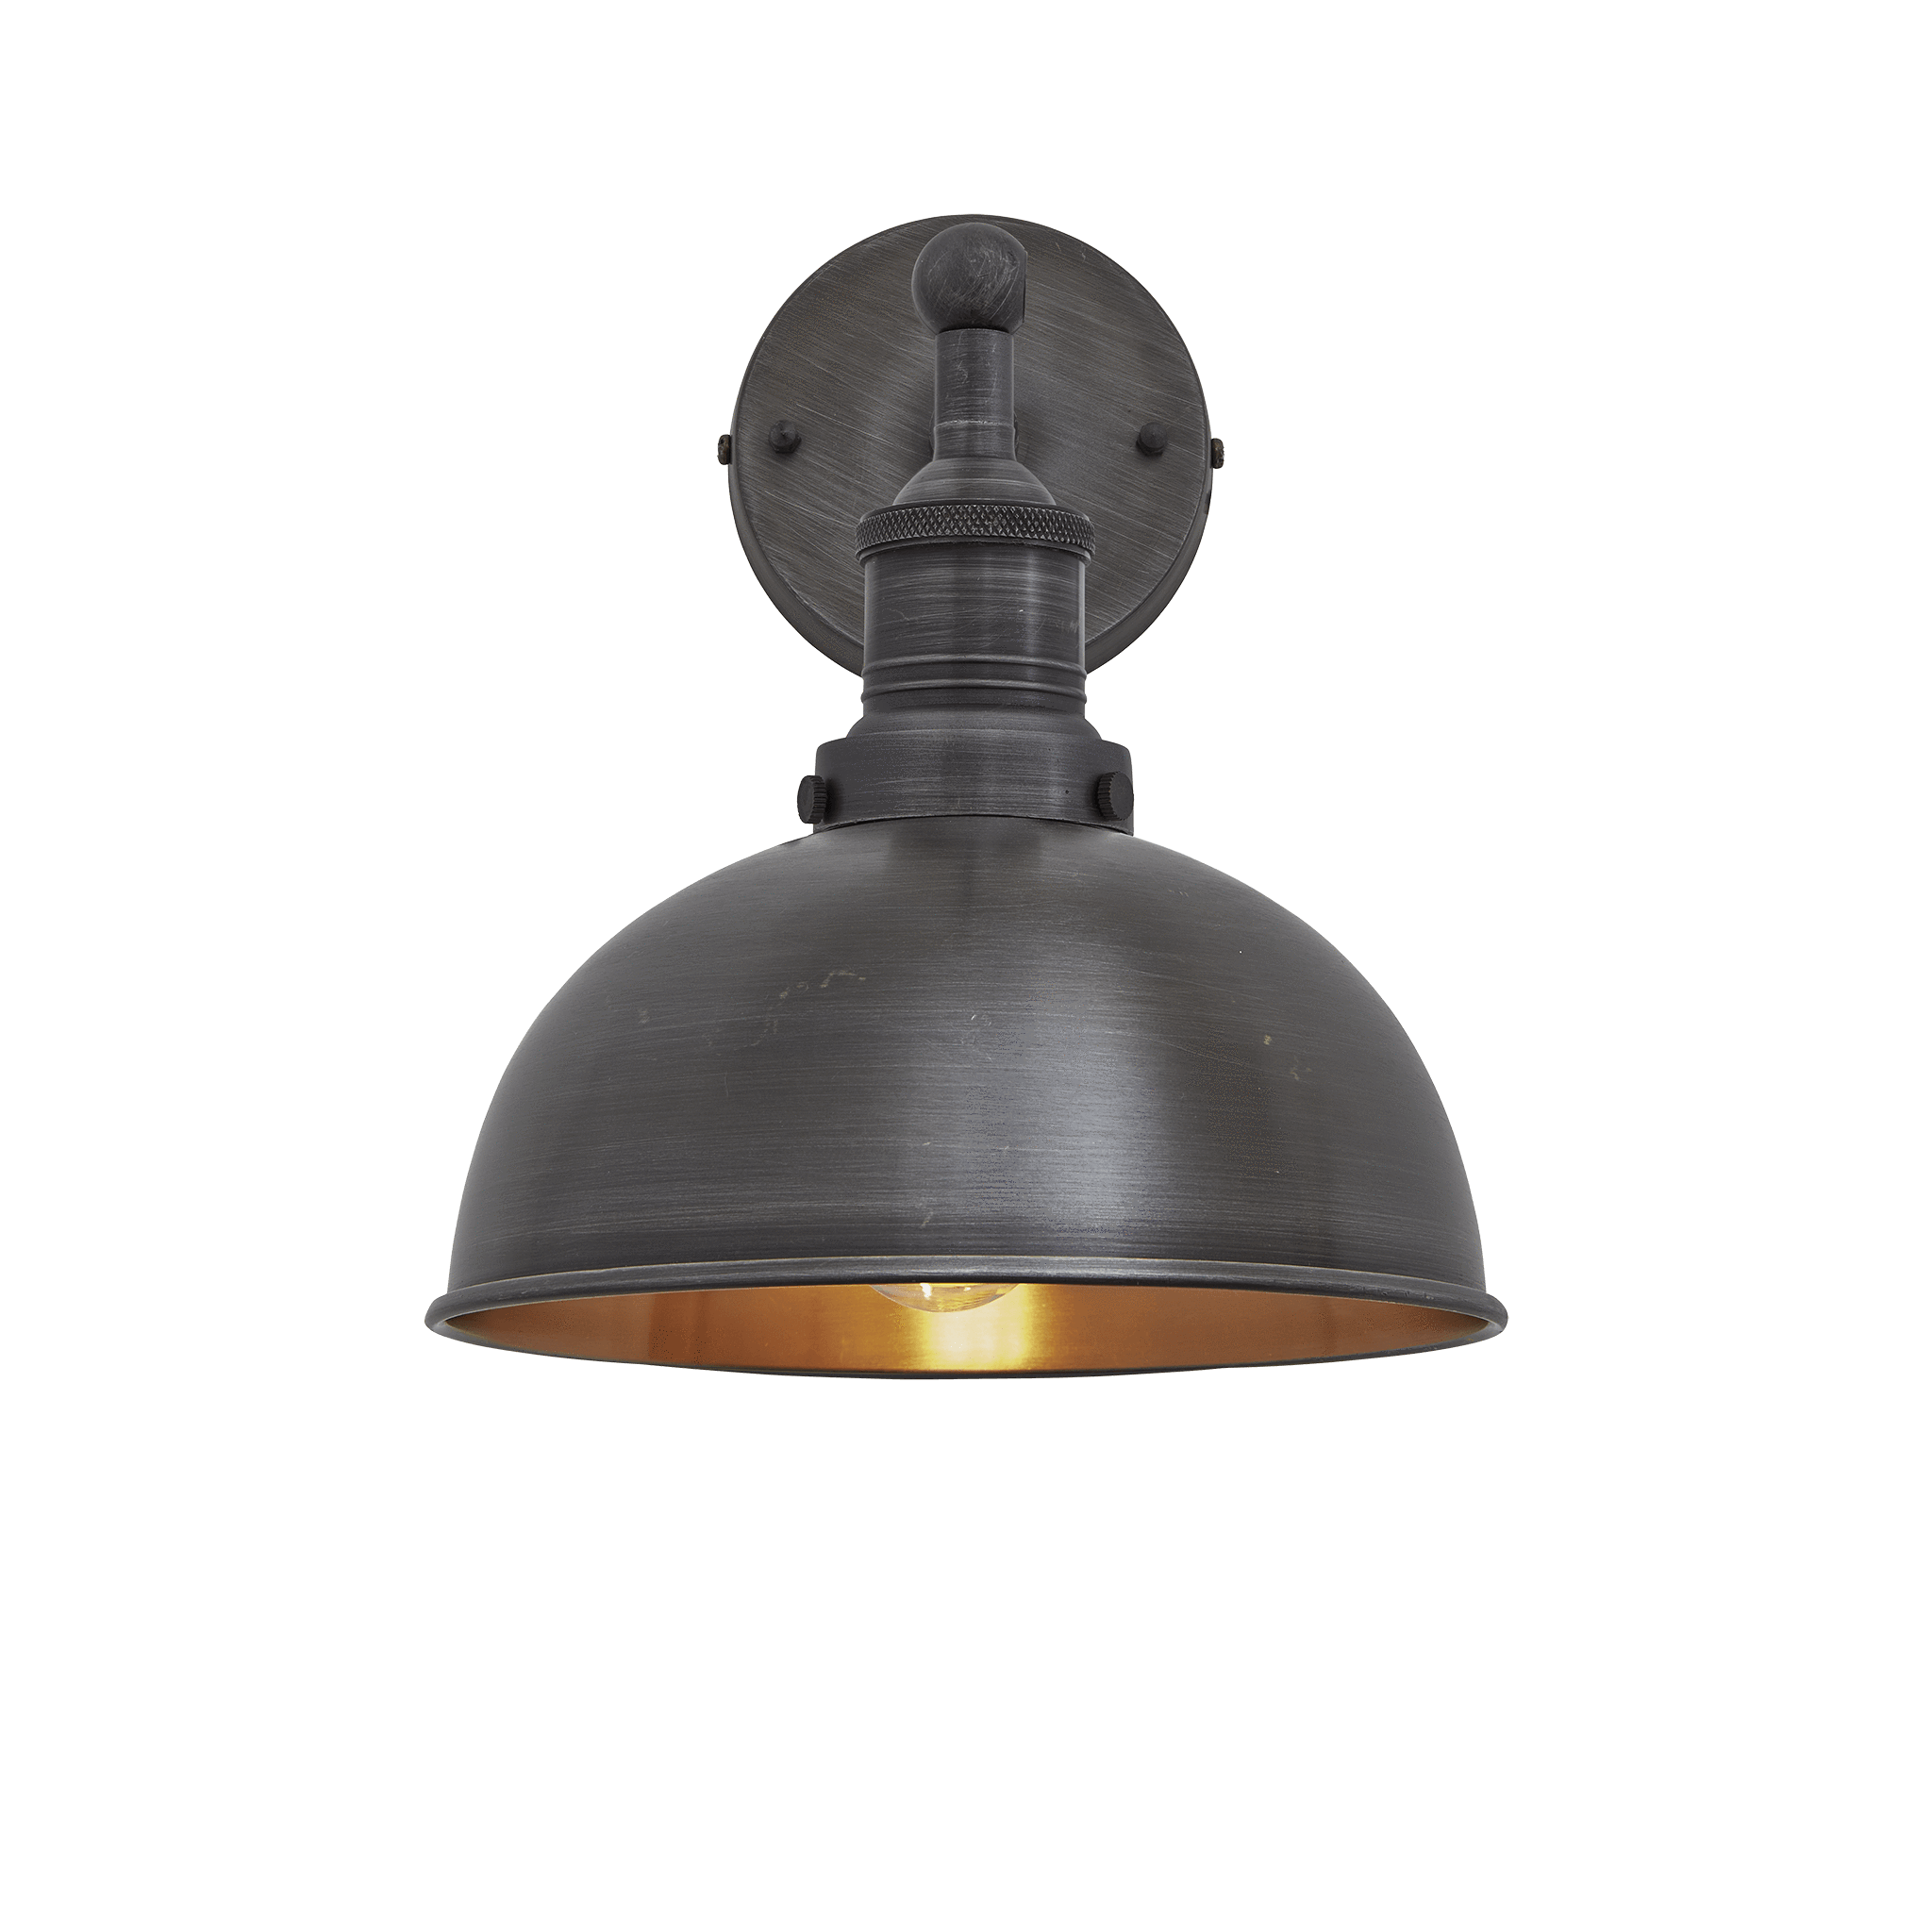 Industville – Brooklyn Dome – 8 Inch – Wall Light Fixture – Black / Grey / Copper Colour – Pewter / Copper / Brass Material – 26.5 CM X 20 CM X 28 CM